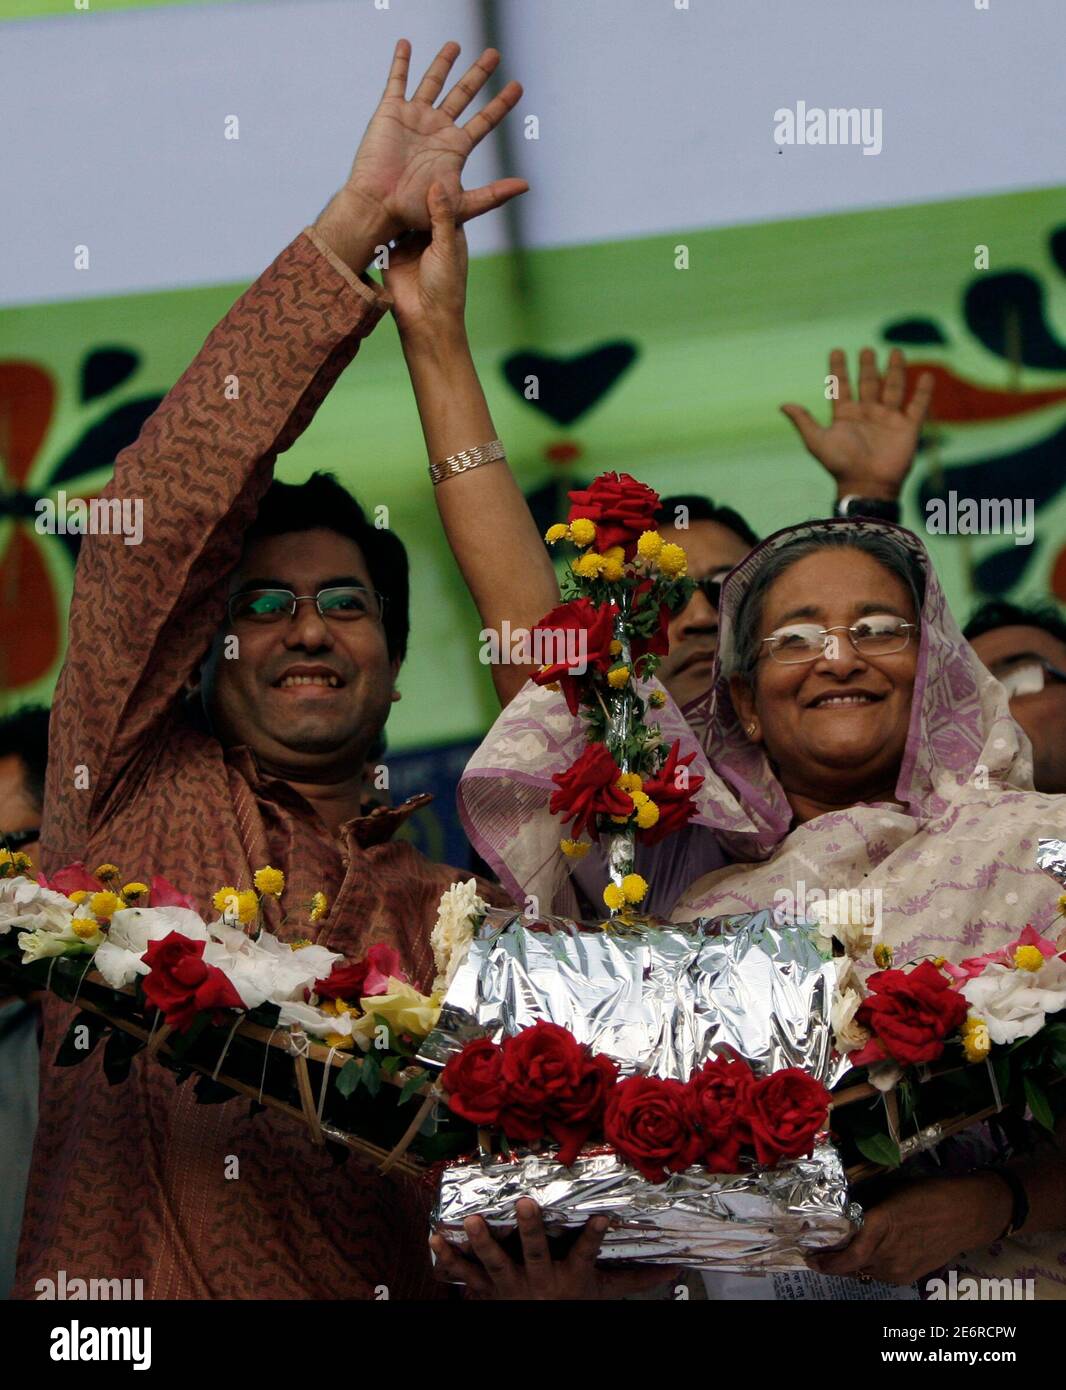 Bangladesh's Awami League president and former prime minister Sheikh Hasina introduces candidate Fazle Noor Taposh (L) during an election rally in Dhaka December 15, 2008. Hasina has started campaigning ahead of the December 29 parliamentary election. REUTERS/Andrew Biraj (BANGLADESH) Stock Photo